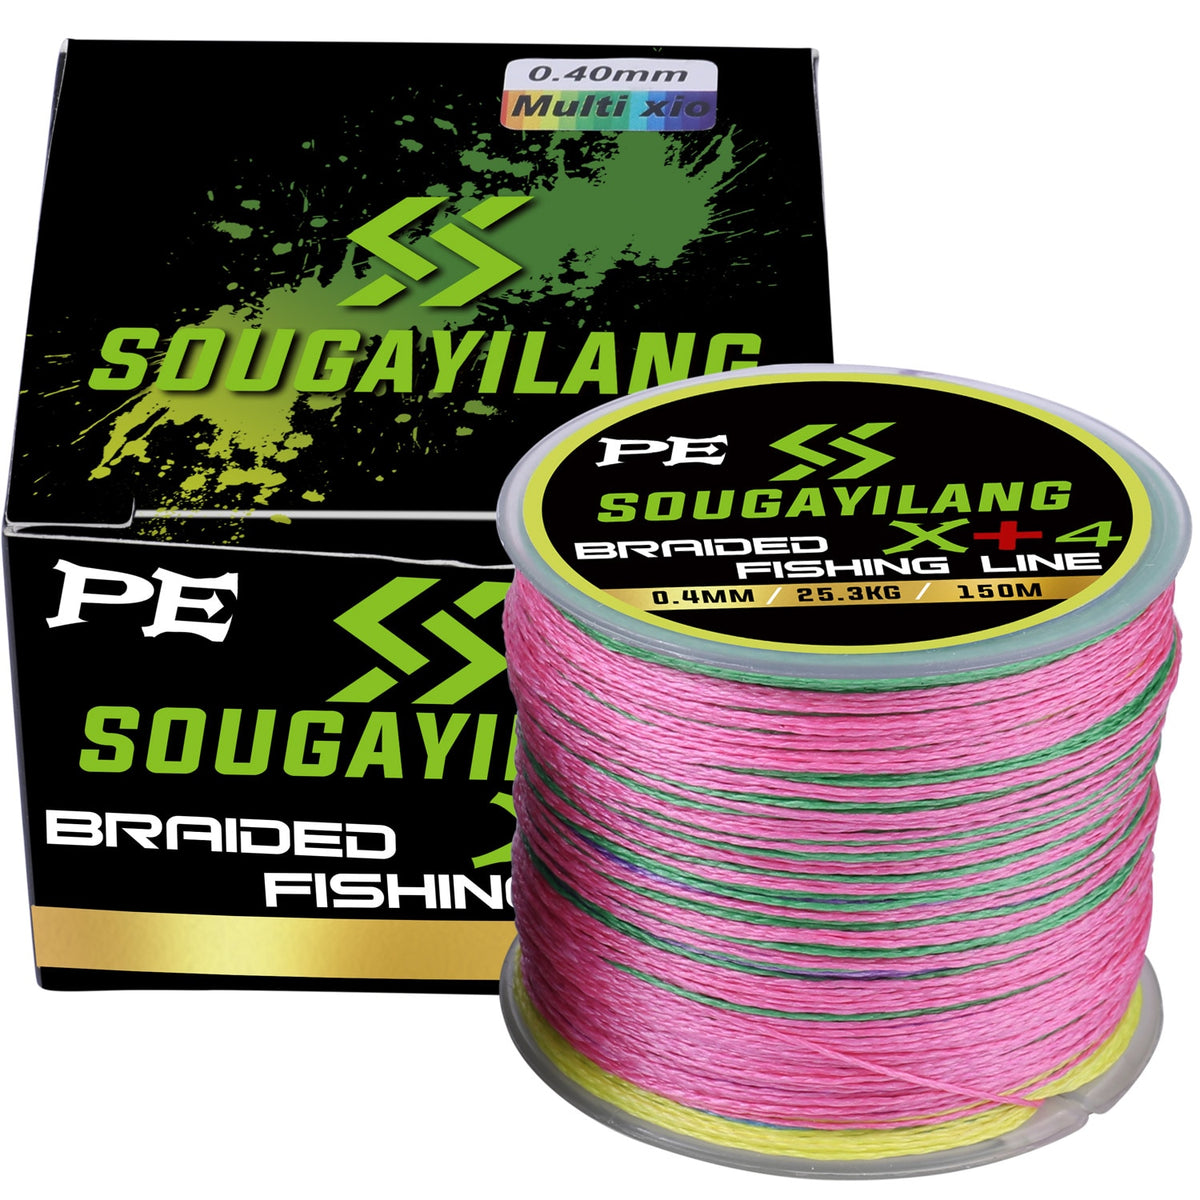 300M Fishing Line Fluorocarbon 4 Strand PE Braided Fishing Wire  Multifilament Fishing Lines For Carp Fishing Saltwater Line - buy 300M Fishing  Line Fluorocarbon 4 Strand PE Braided Fishing Wire Multifilament Fishing